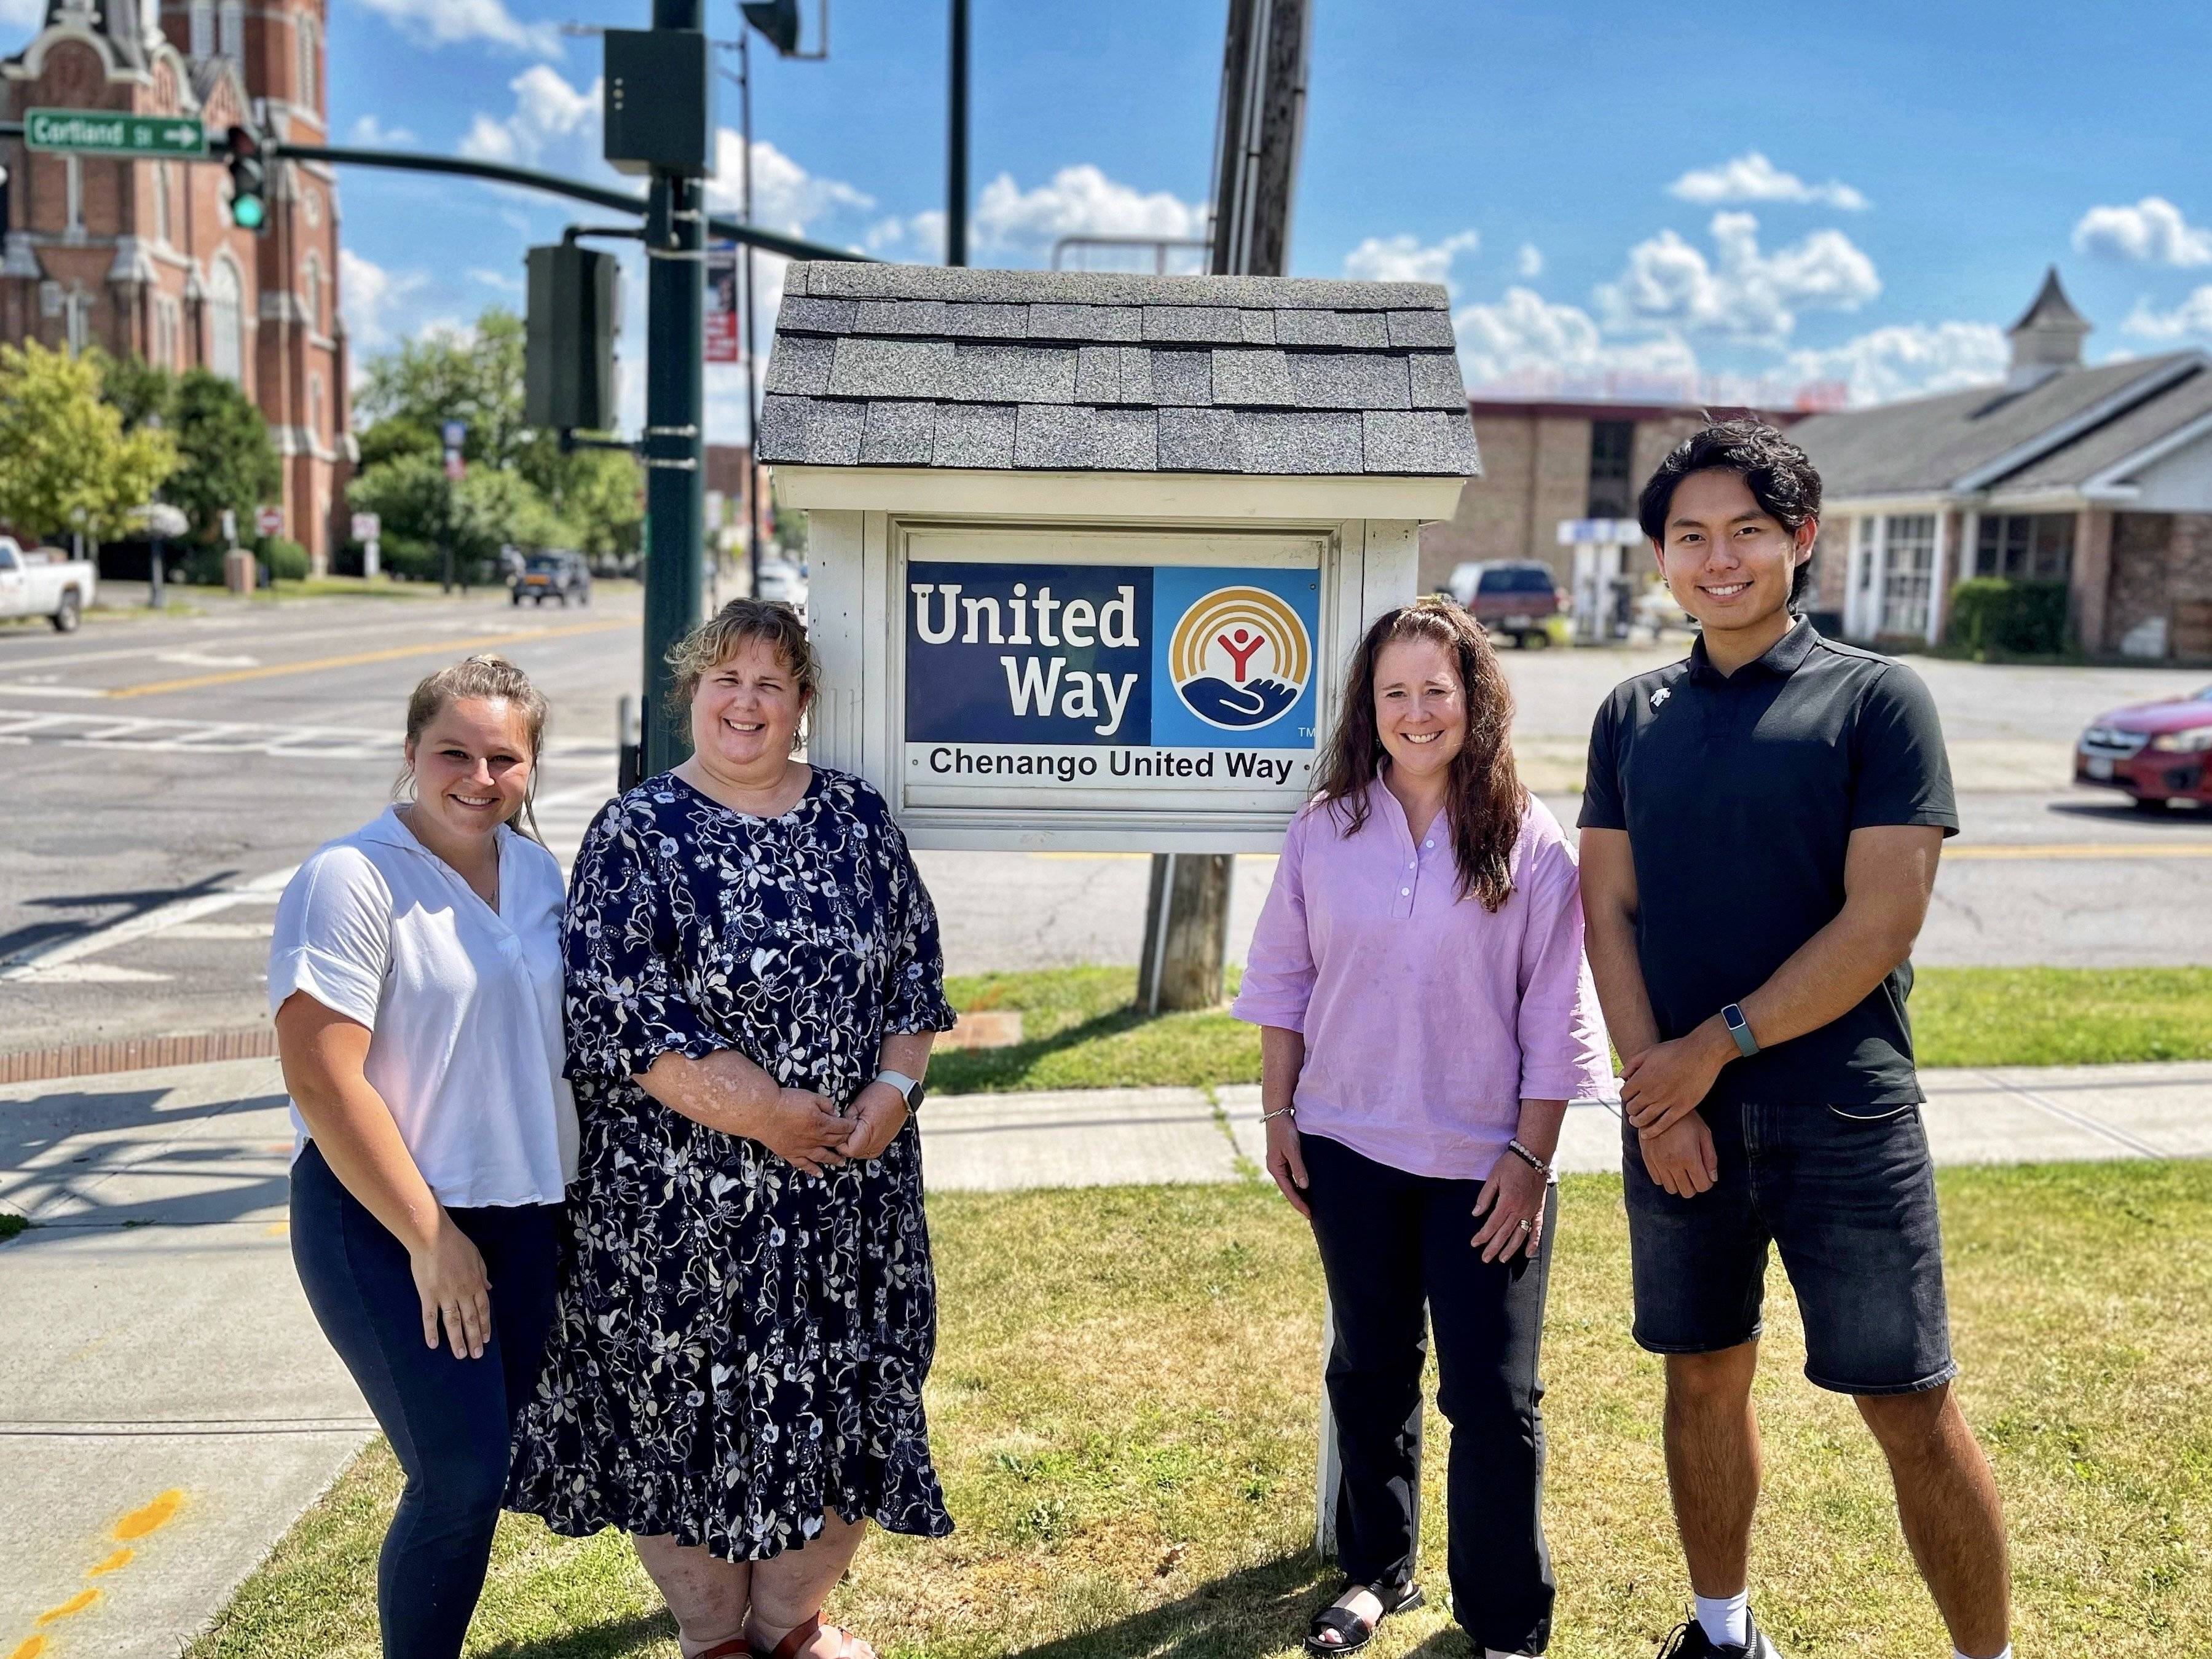 David Xiu stands with United Way staff in front of the United Way sign